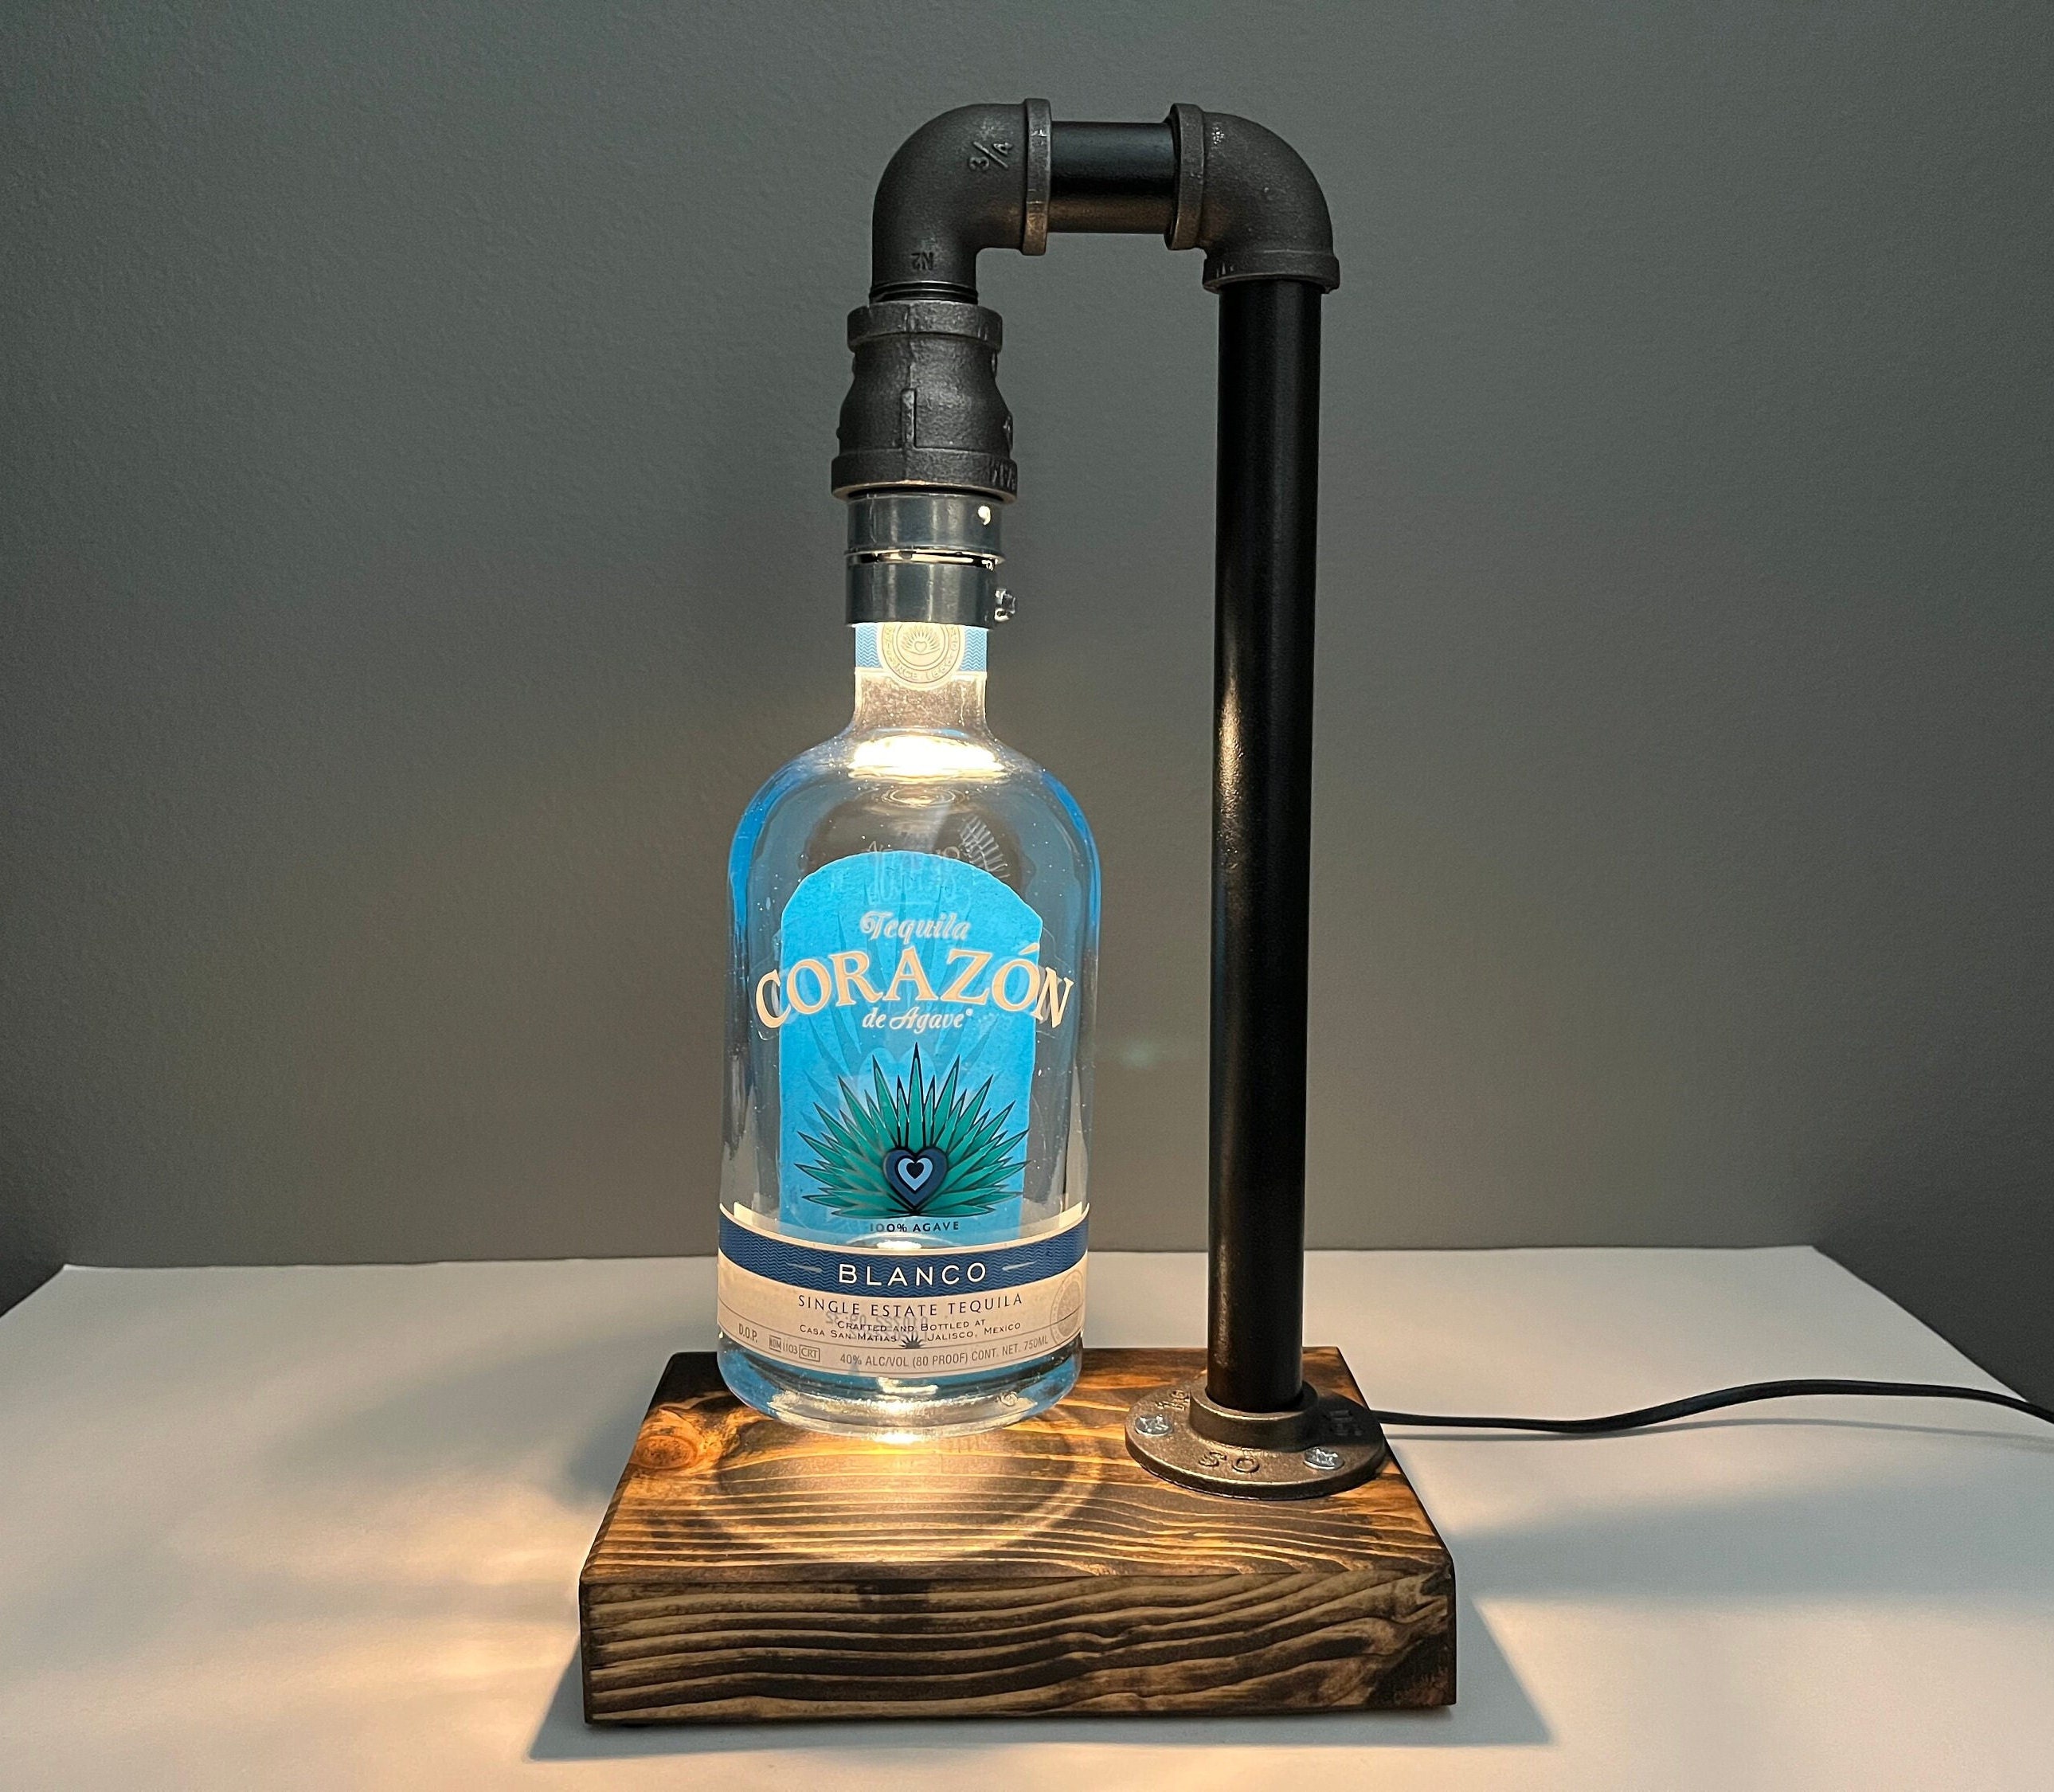 Upcycled Grey Goose Vodka Mood Therapy Liquor Bottle Light with